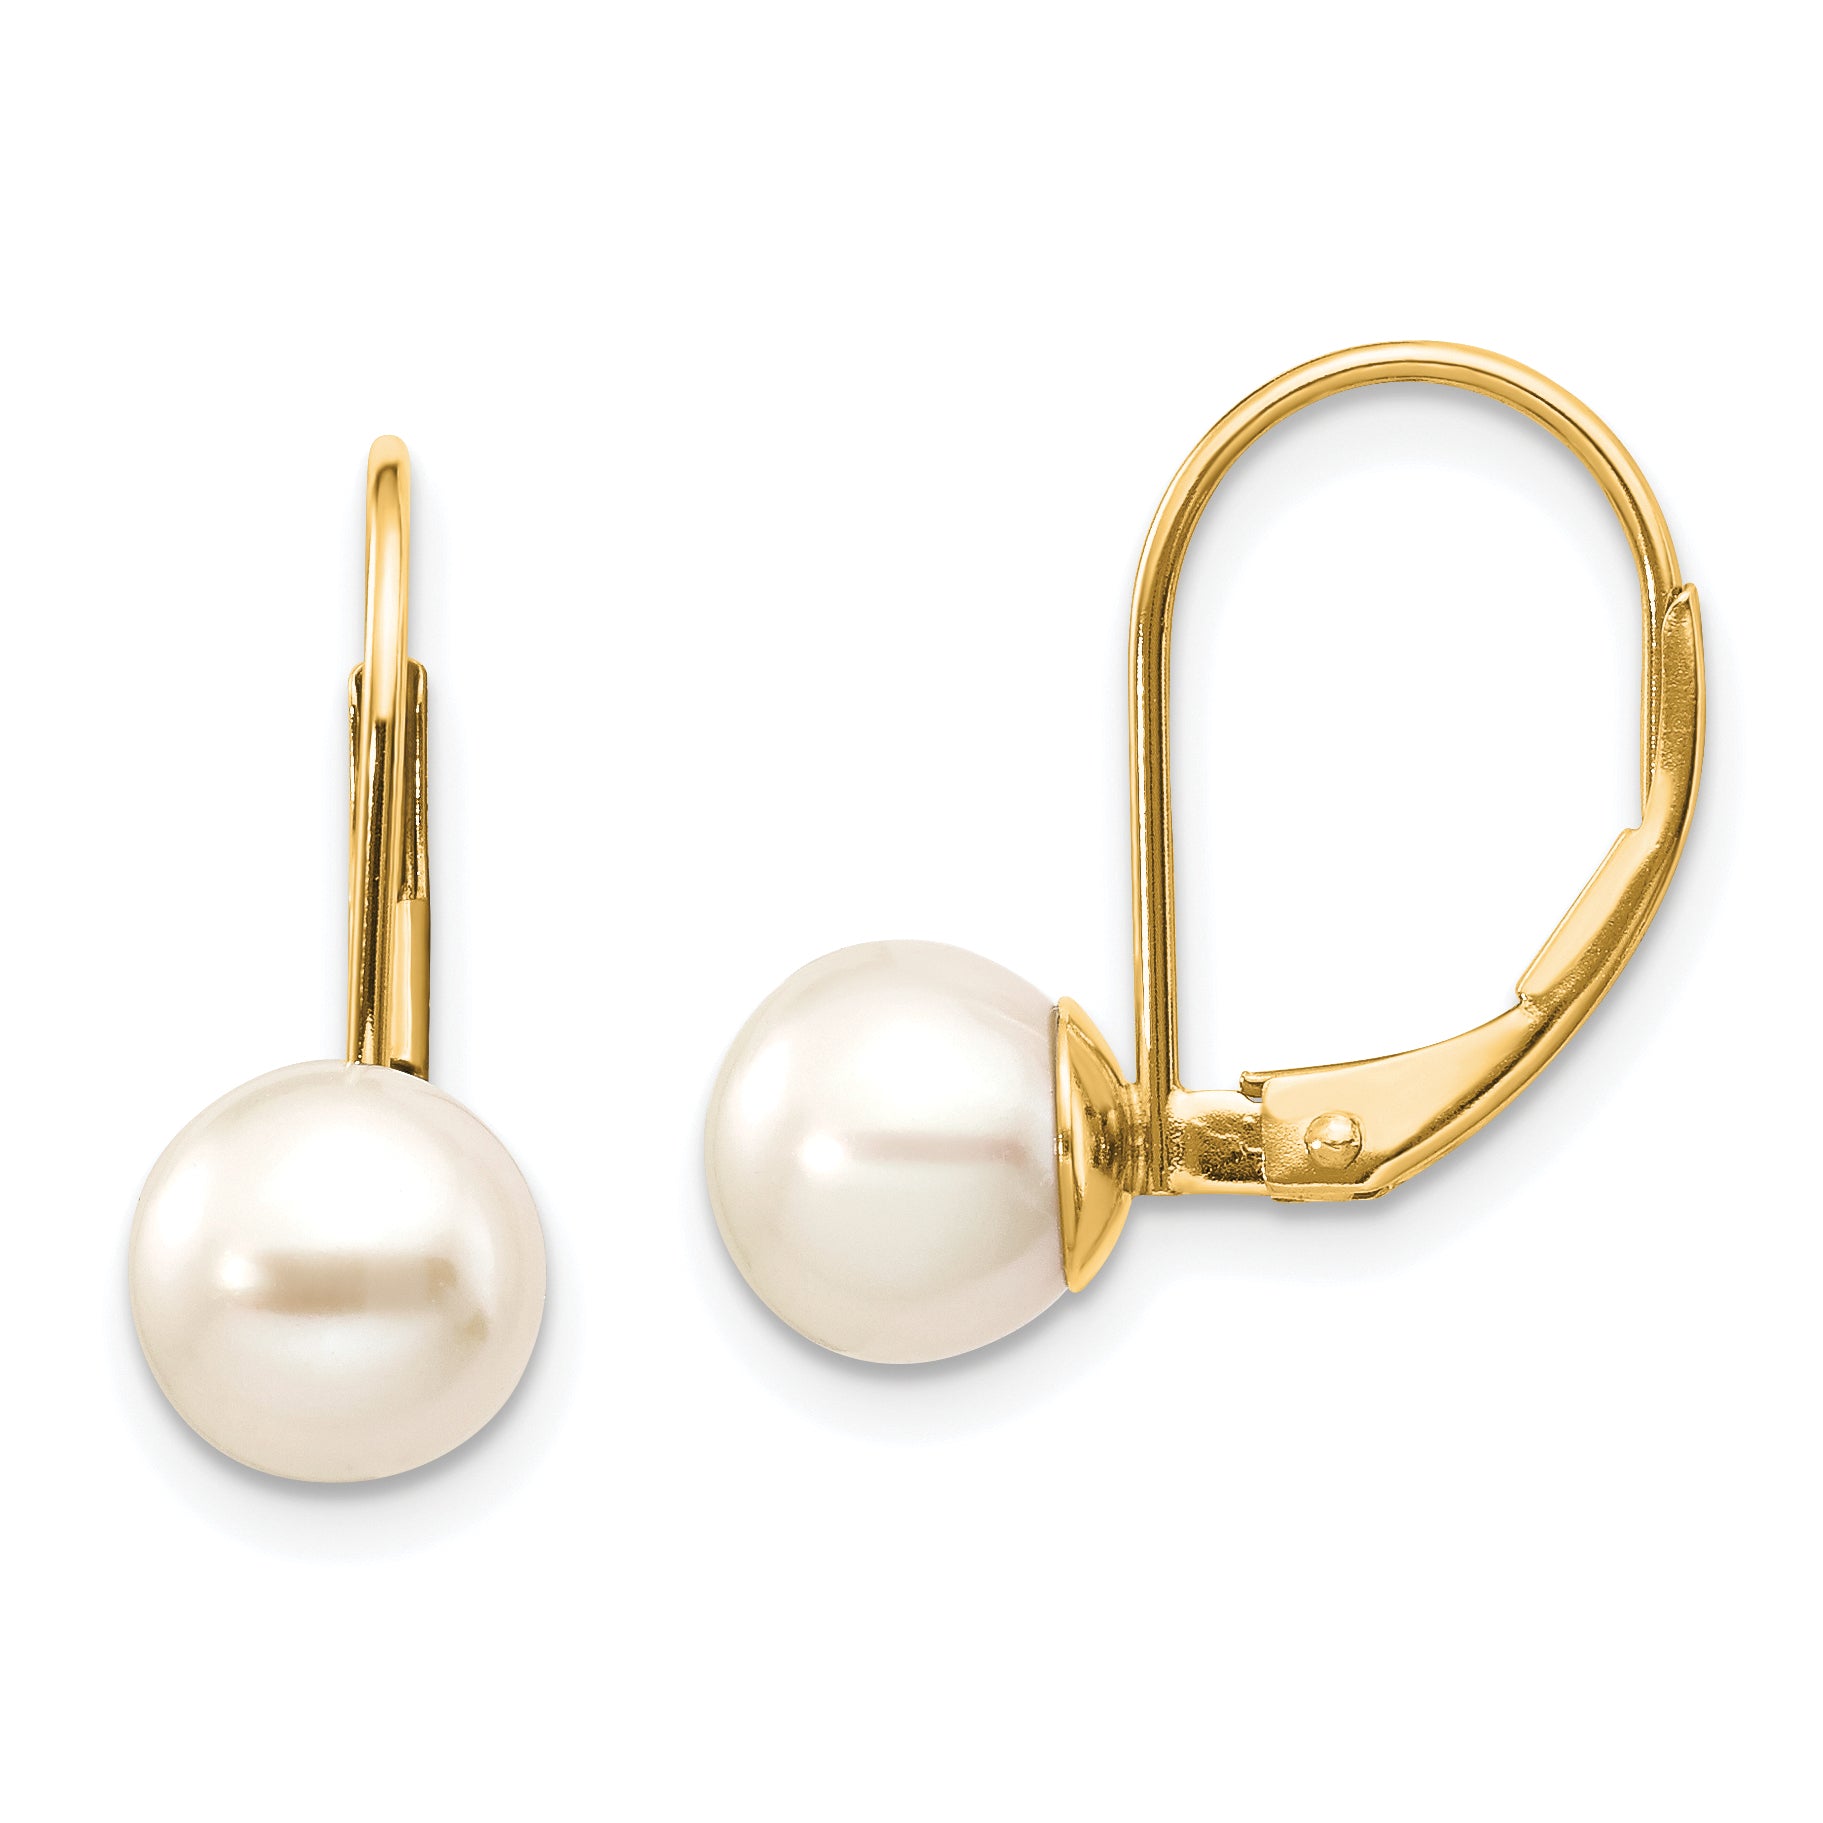 14k 7-8mm White Round Freshwater Cultured Pearl Leverback Earrings